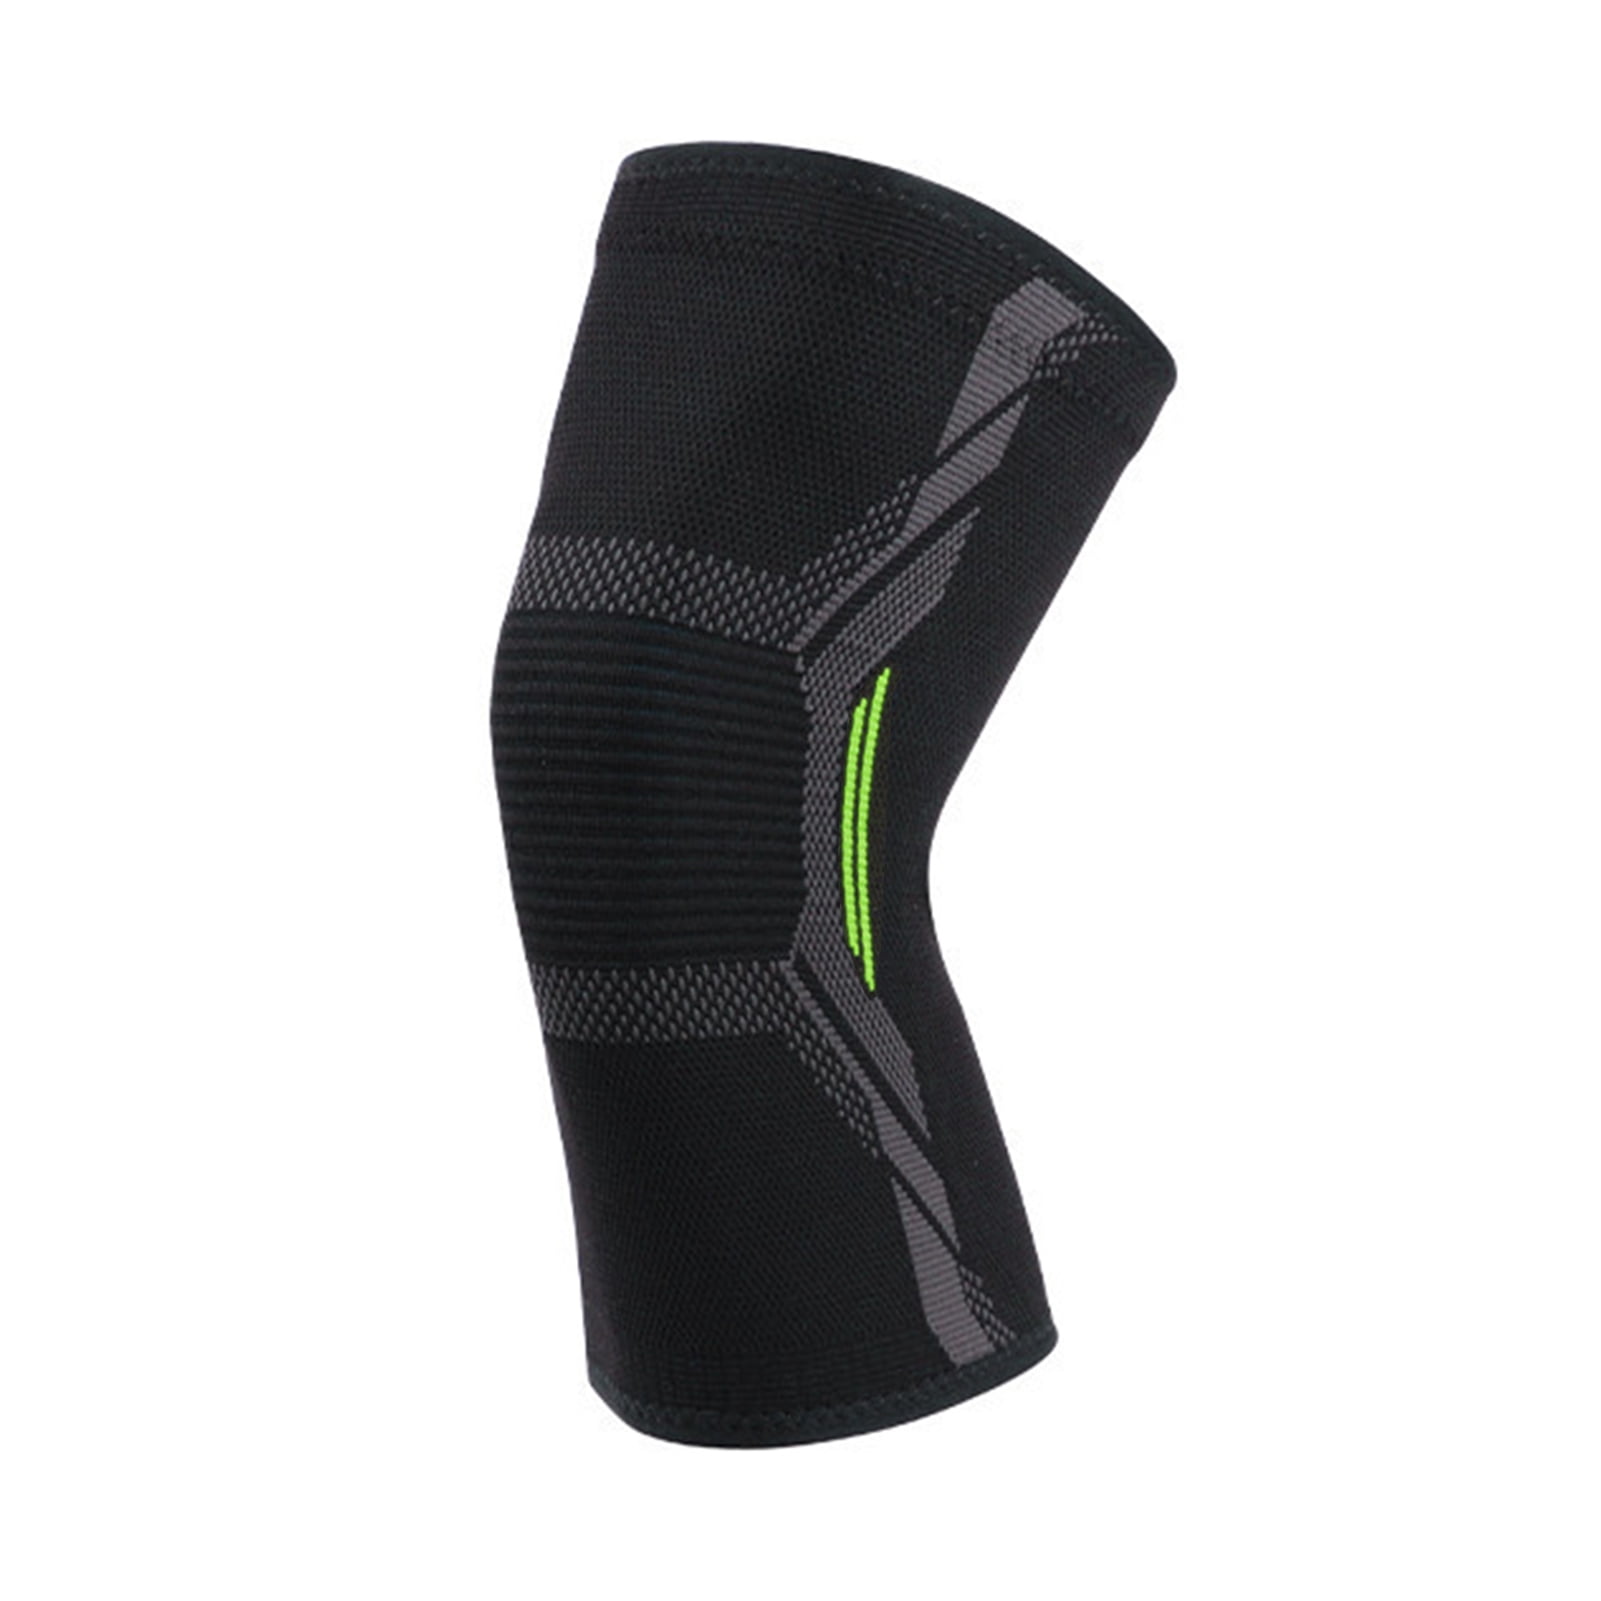  Bauerfeind Sports Knee Support - Knee Brace for